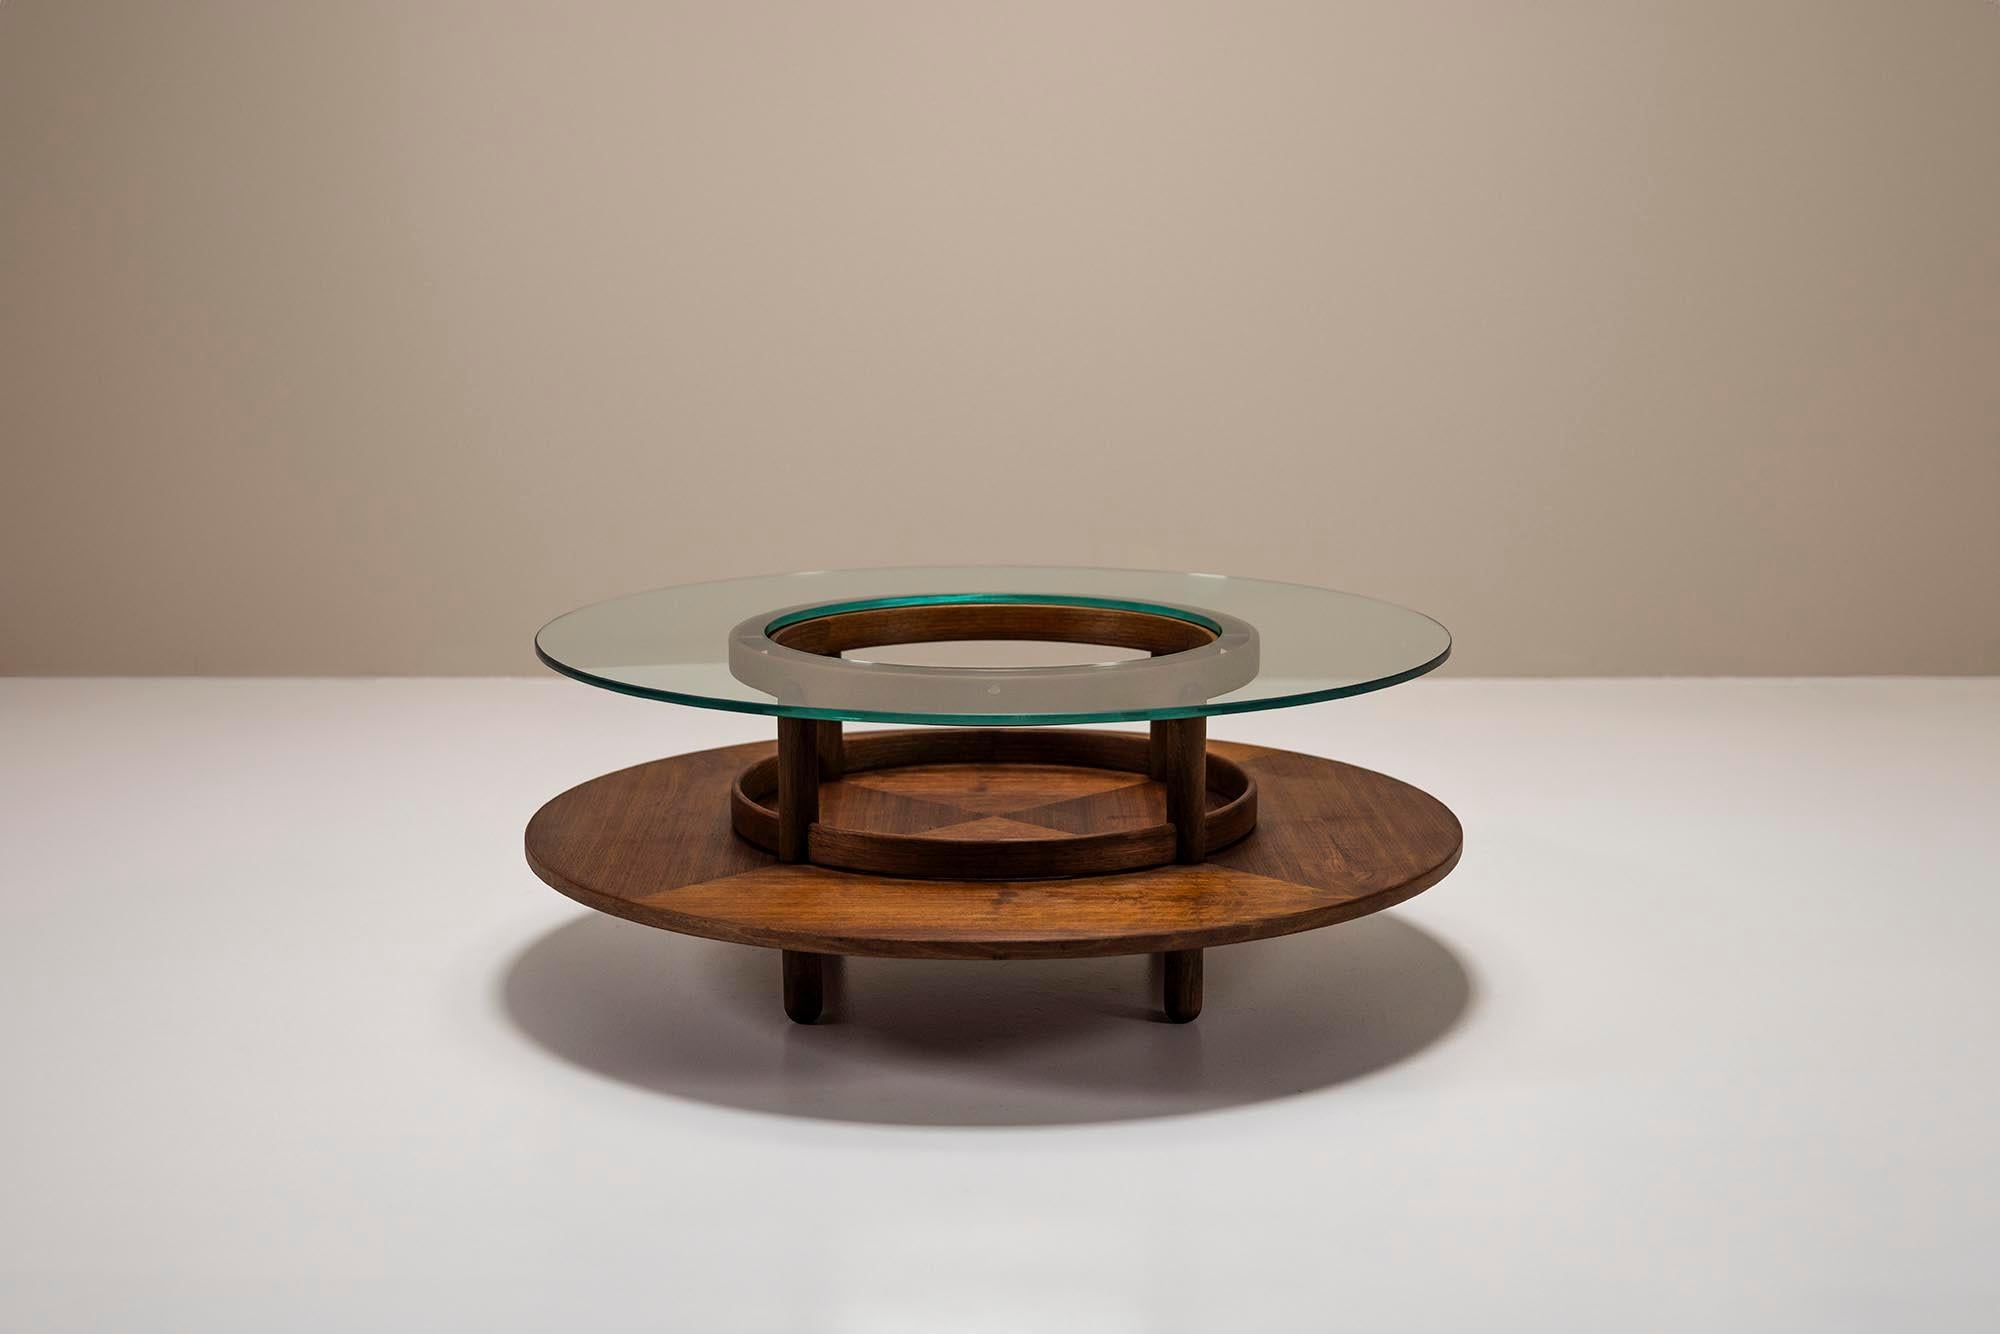 This coffee table has a majestic appearance that at the same time creates a dynamic in the room in which it is placed. A clear example of the sheer power of Italian mid-century design dating back from the middle of the last century. A period where